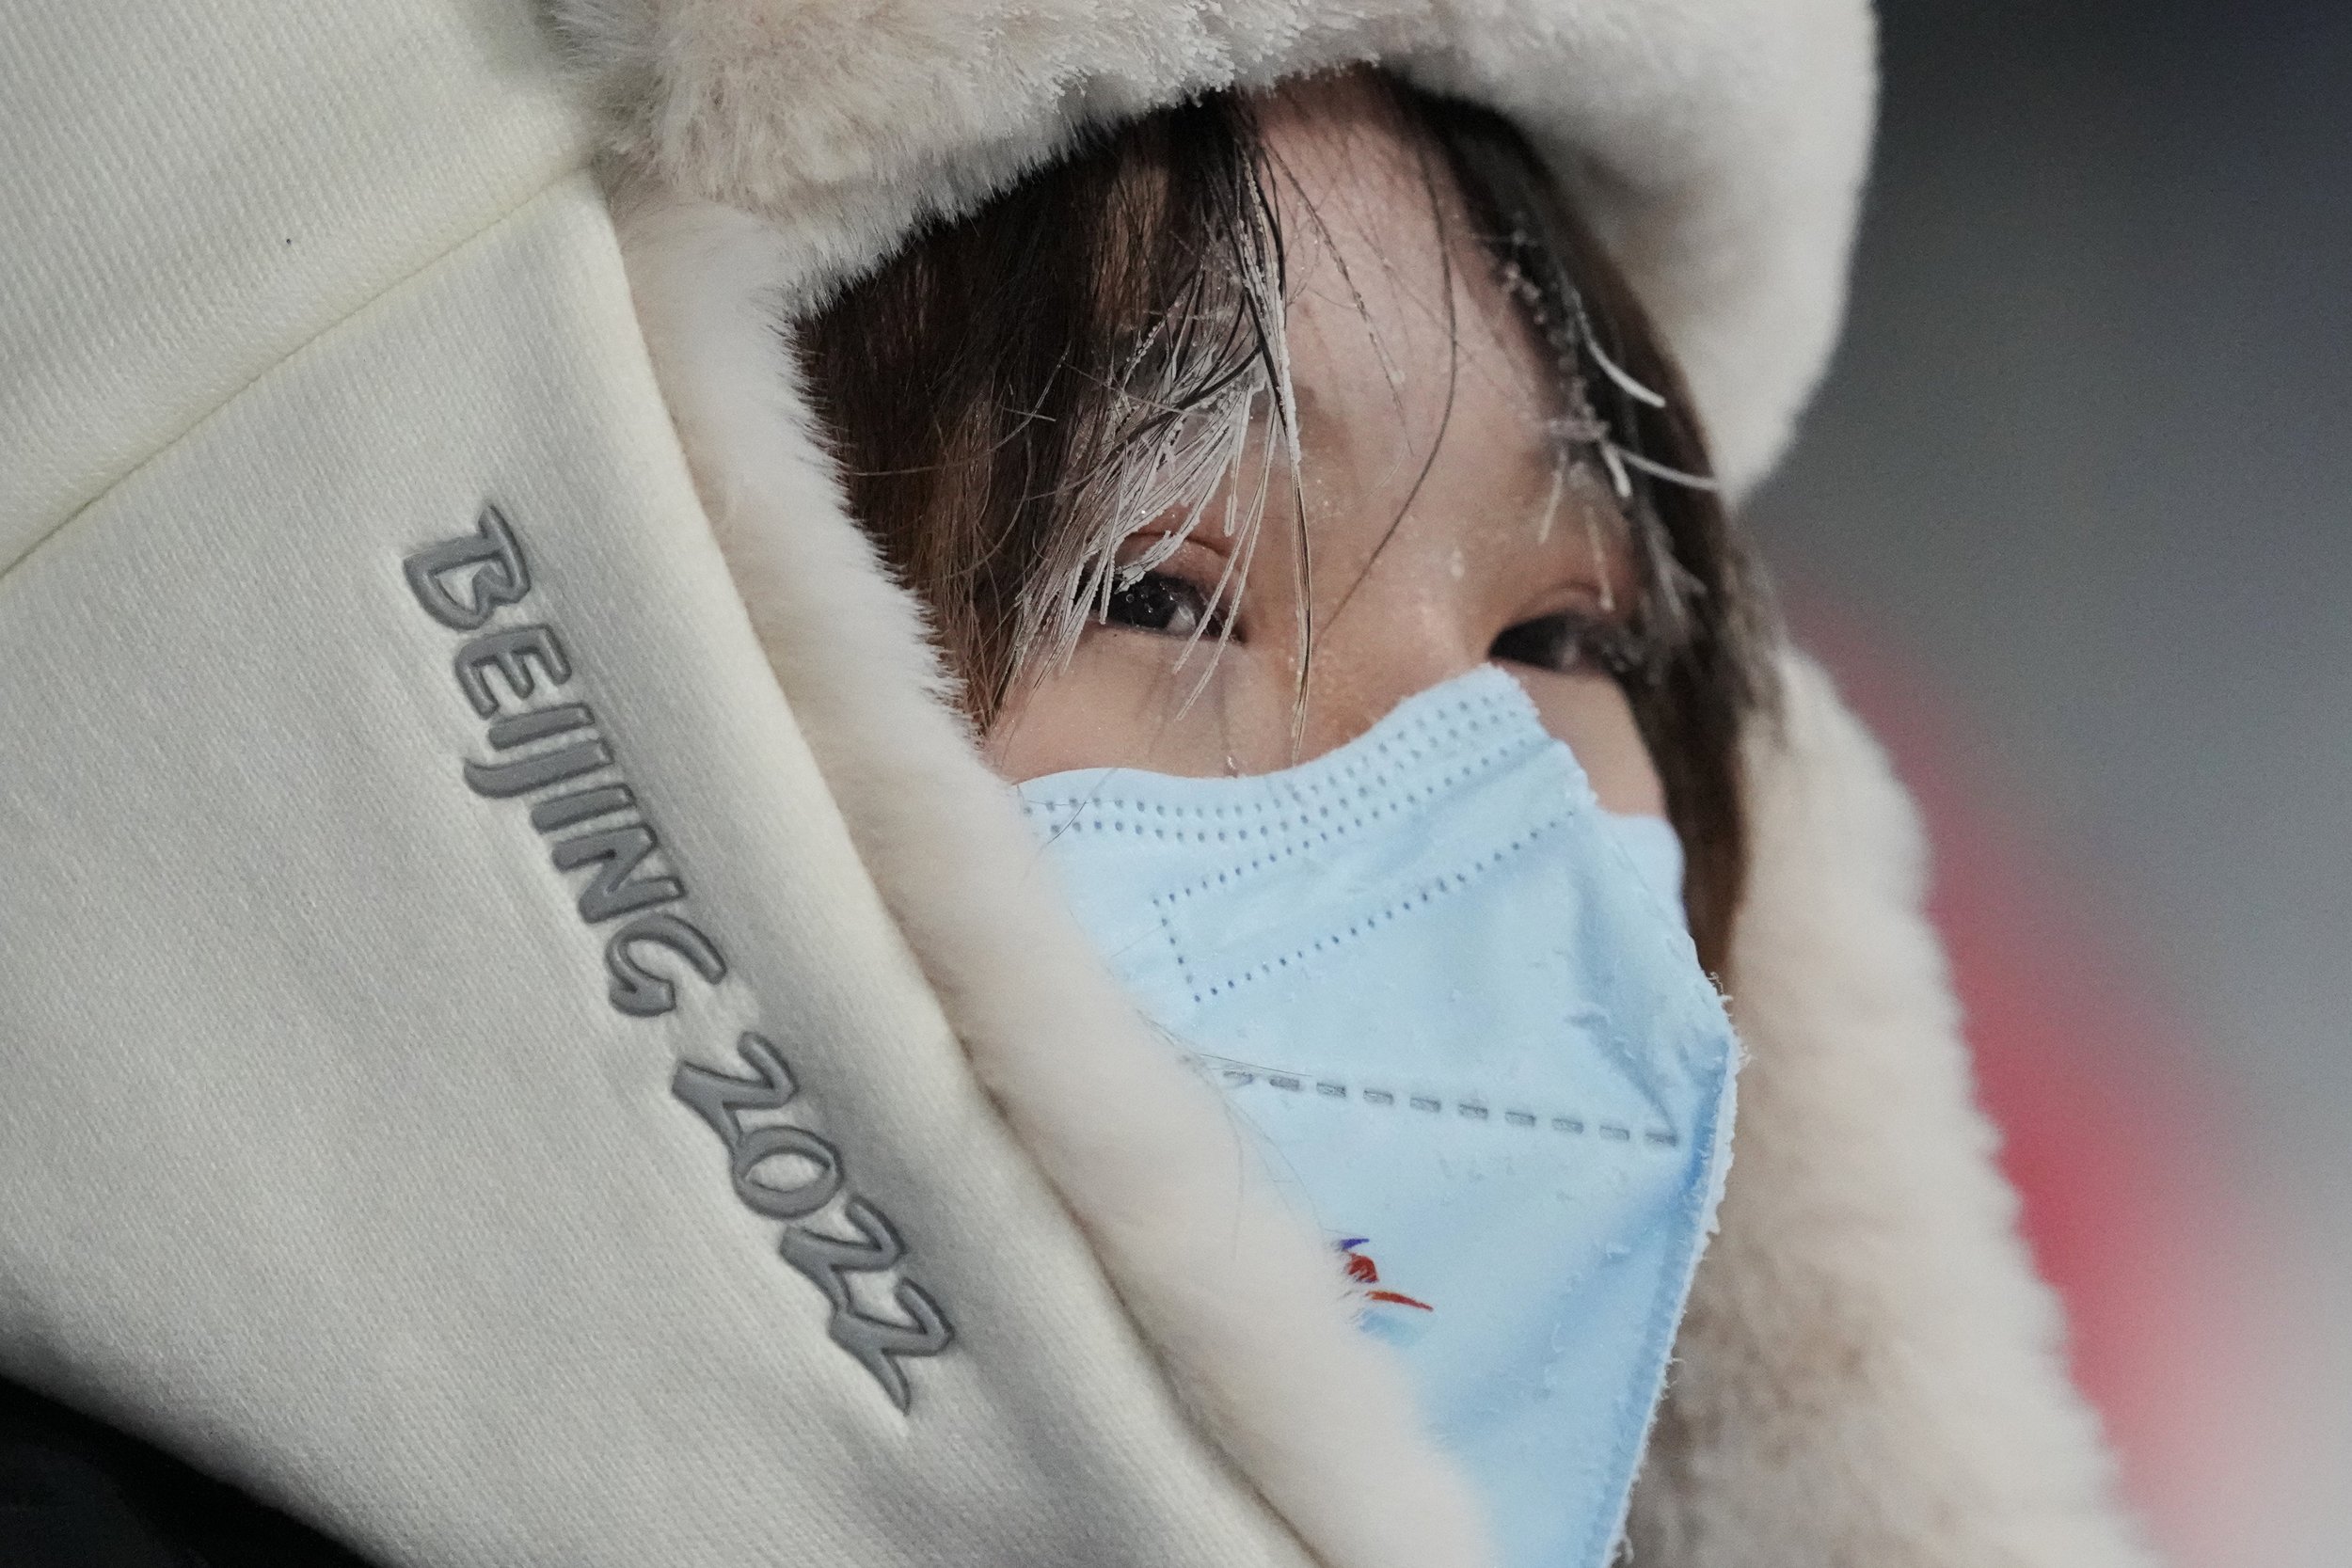  Ice forms on the hair of a volunteer during the men's aerials qualification at the 2022 Winter Olympics, Tuesday, Feb. 15, 2022, in Zhangjiakou, China. (AP Photo/Lee Jin-man) 